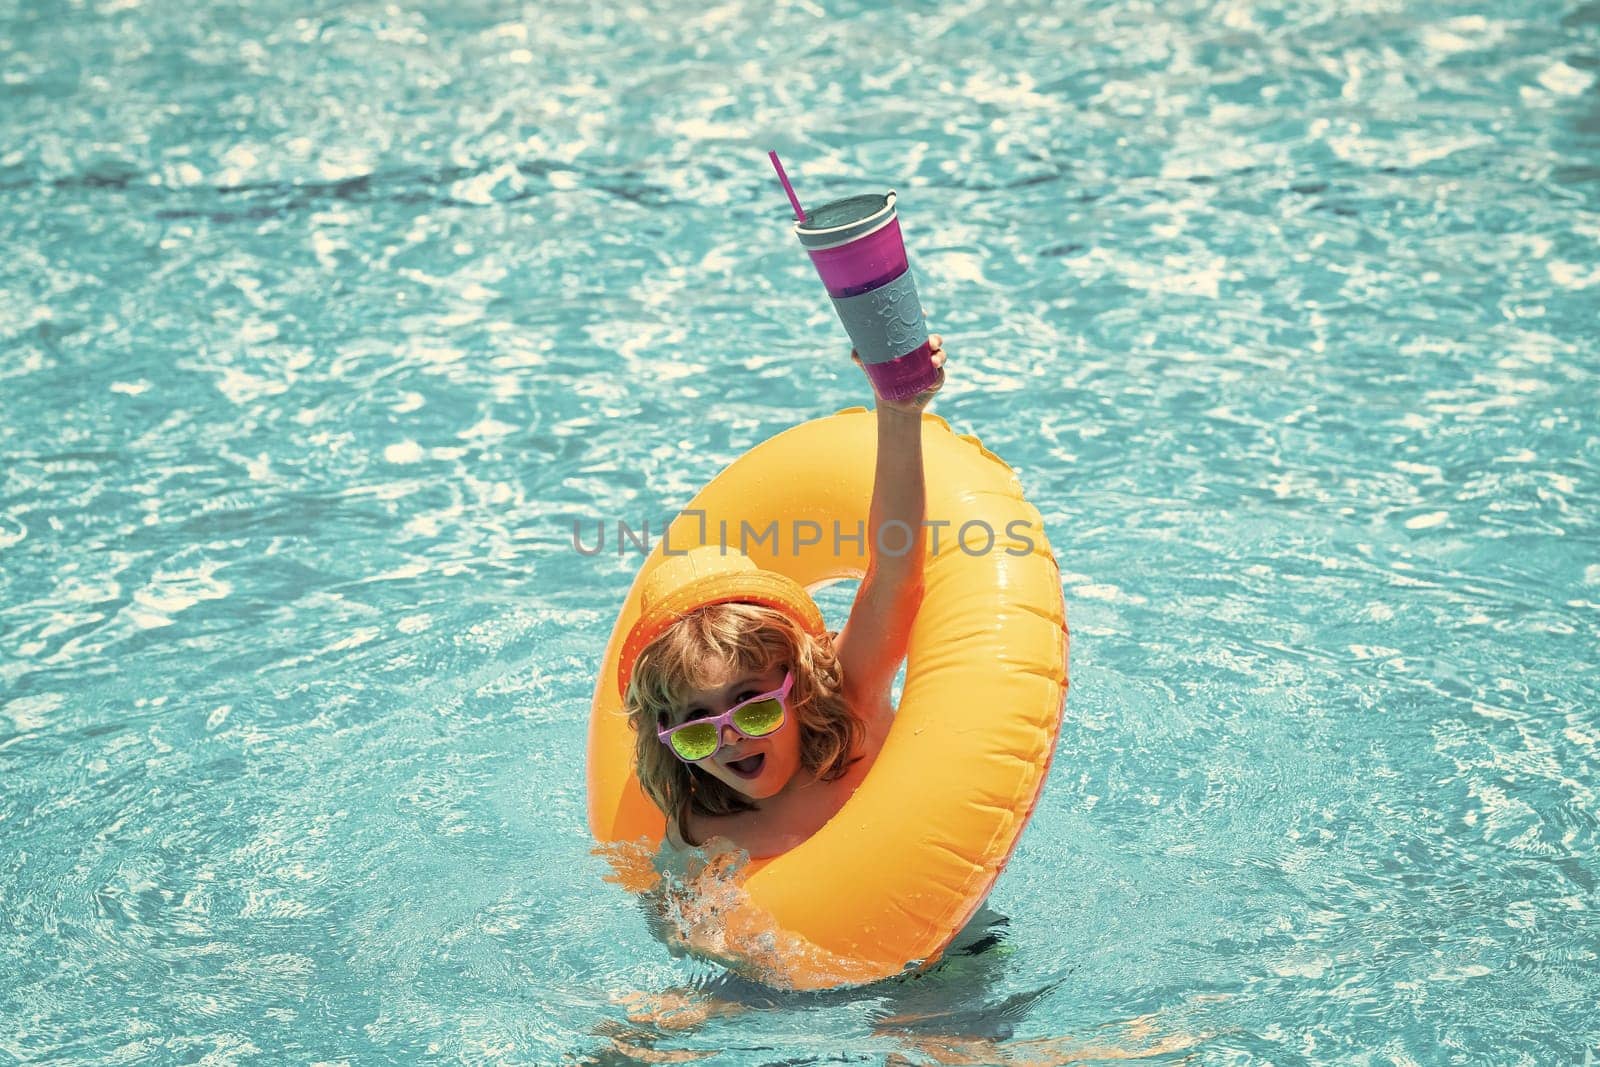 Child in swimming pool on inflatable float ring. Water toy, healthy outdoor sport activity for children. Kids beach fun. Child splashing in summer water pool